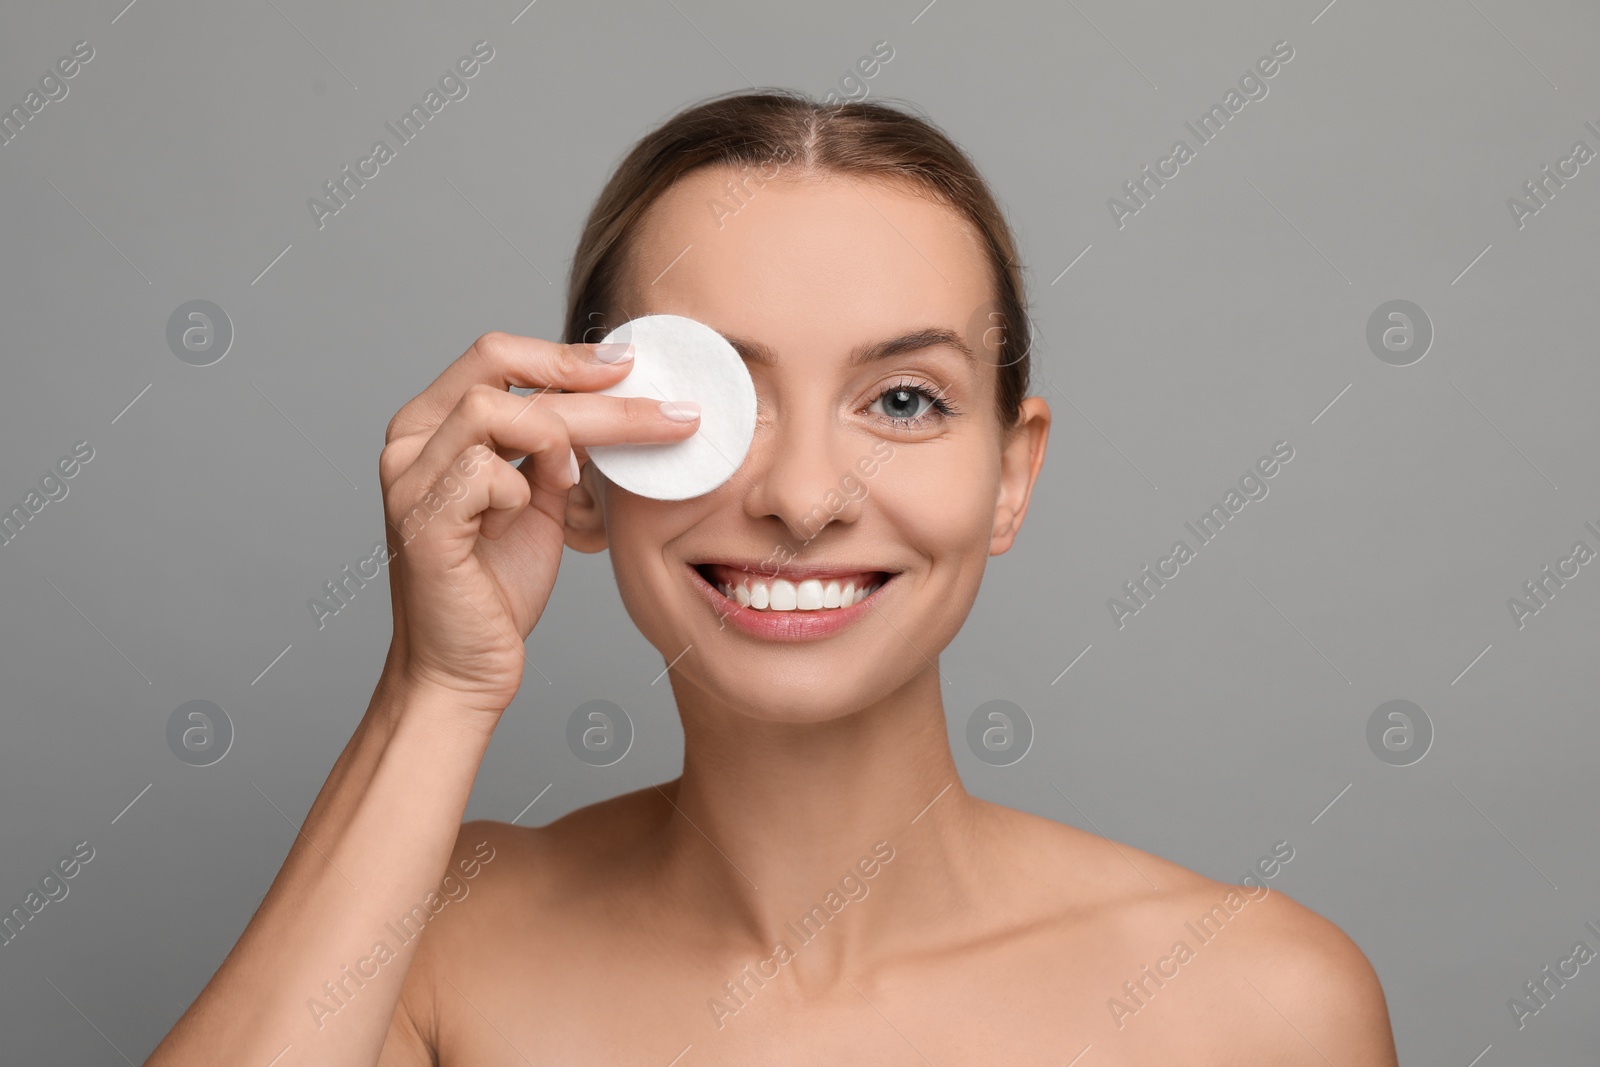 Photo of Smiling woman removing makeup with cotton pad on grey background